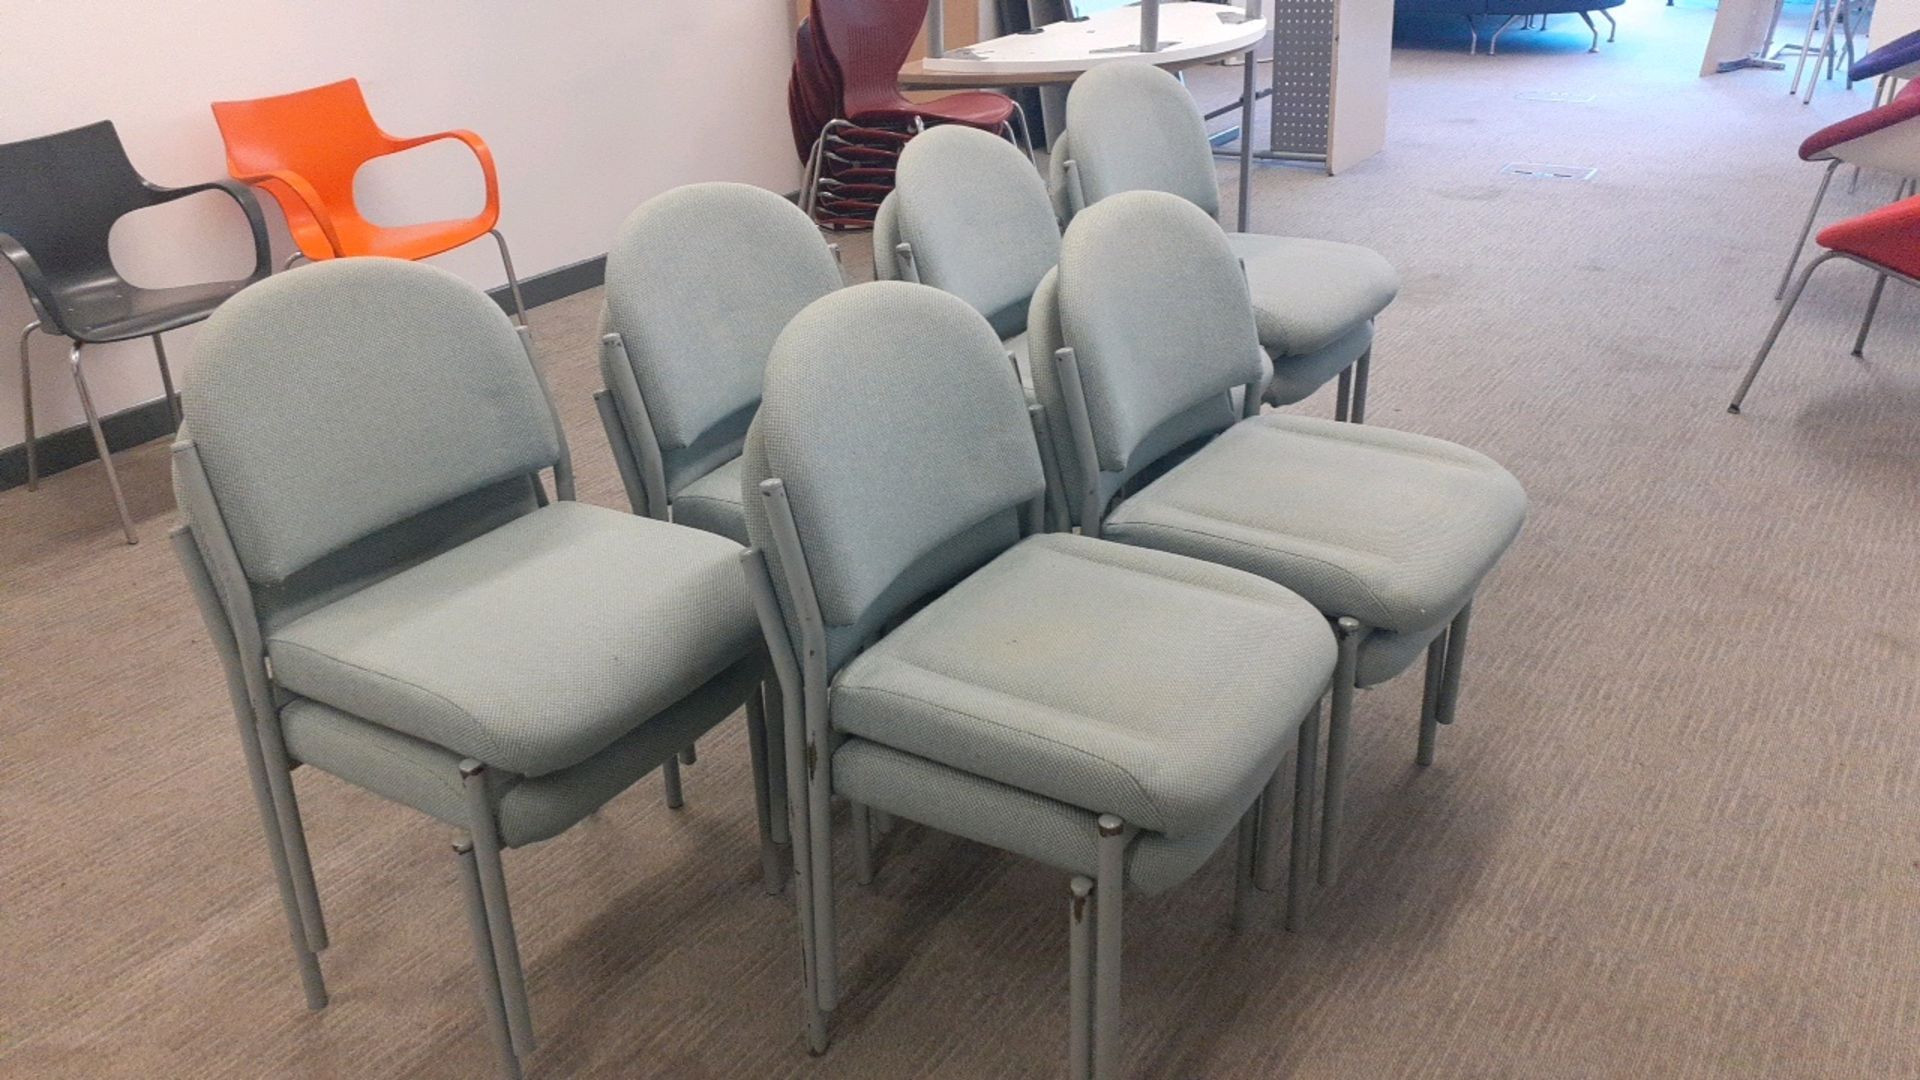 Meeting chairs - Image 2 of 2